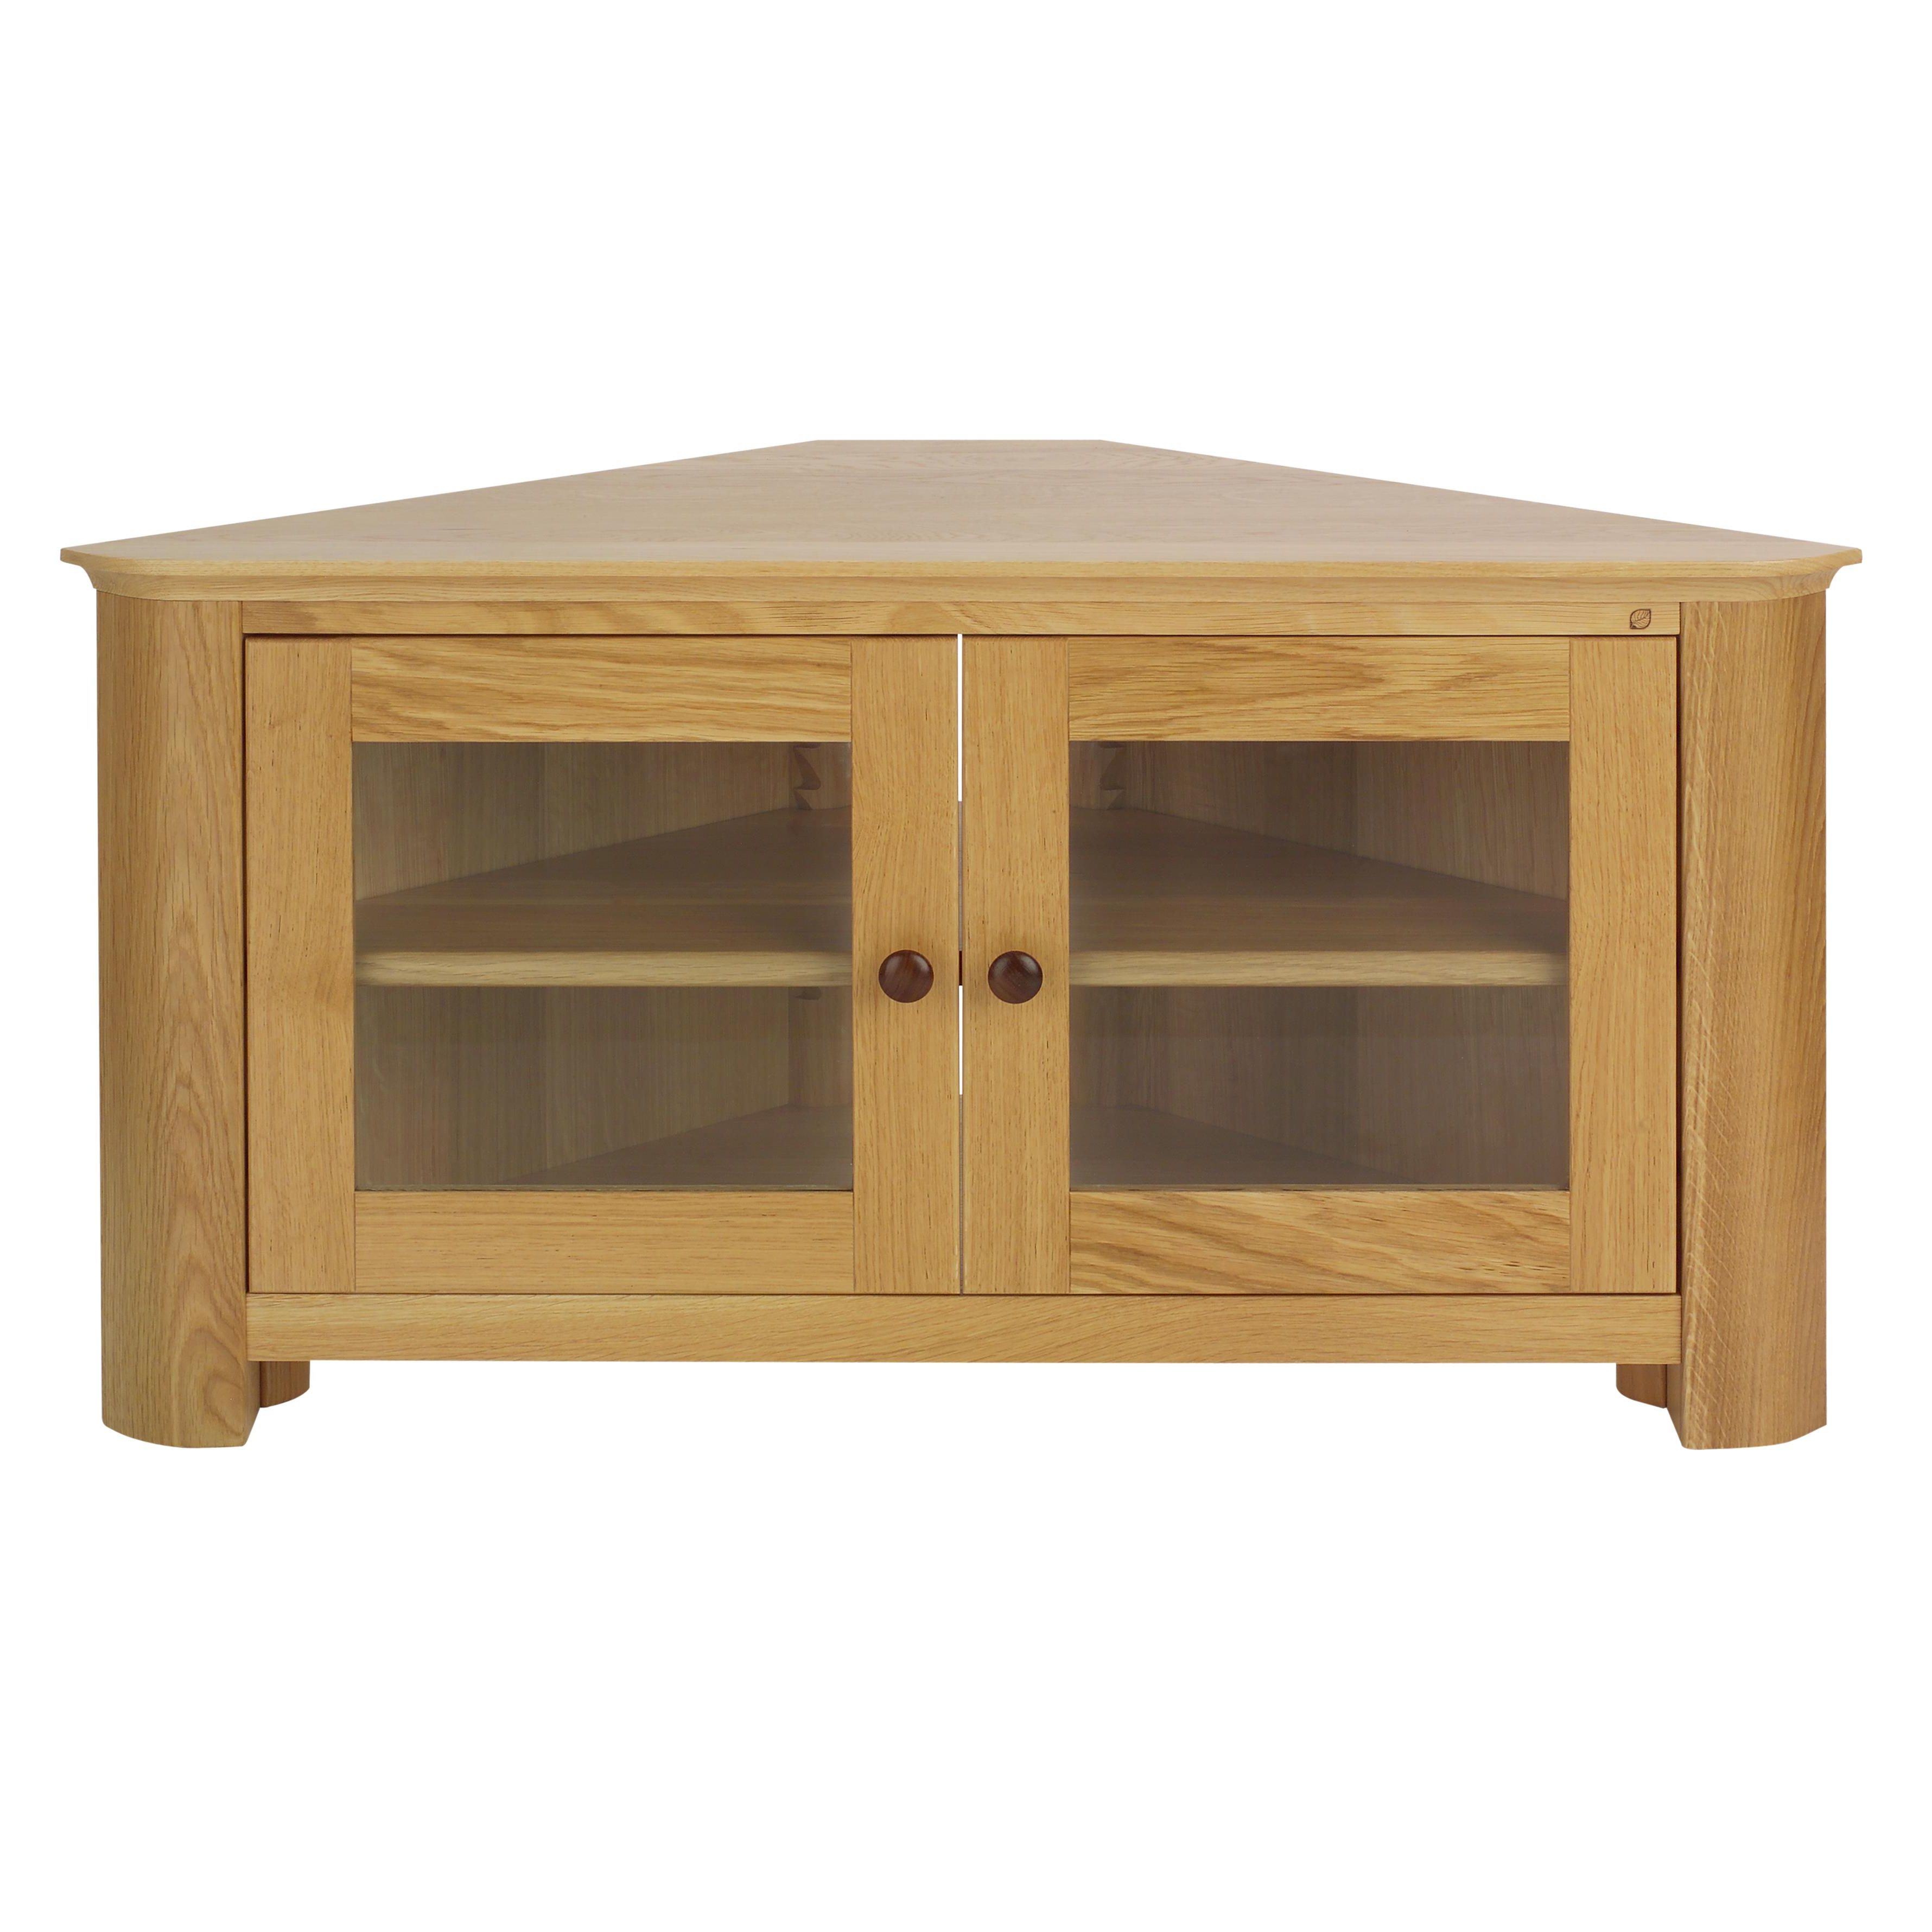 Widely Used Oak Corner Tv Stands Regarding Medium Oak Tv Stand Or Corner With Plus Cabinet Together Stands Flat (View 12 of 20)